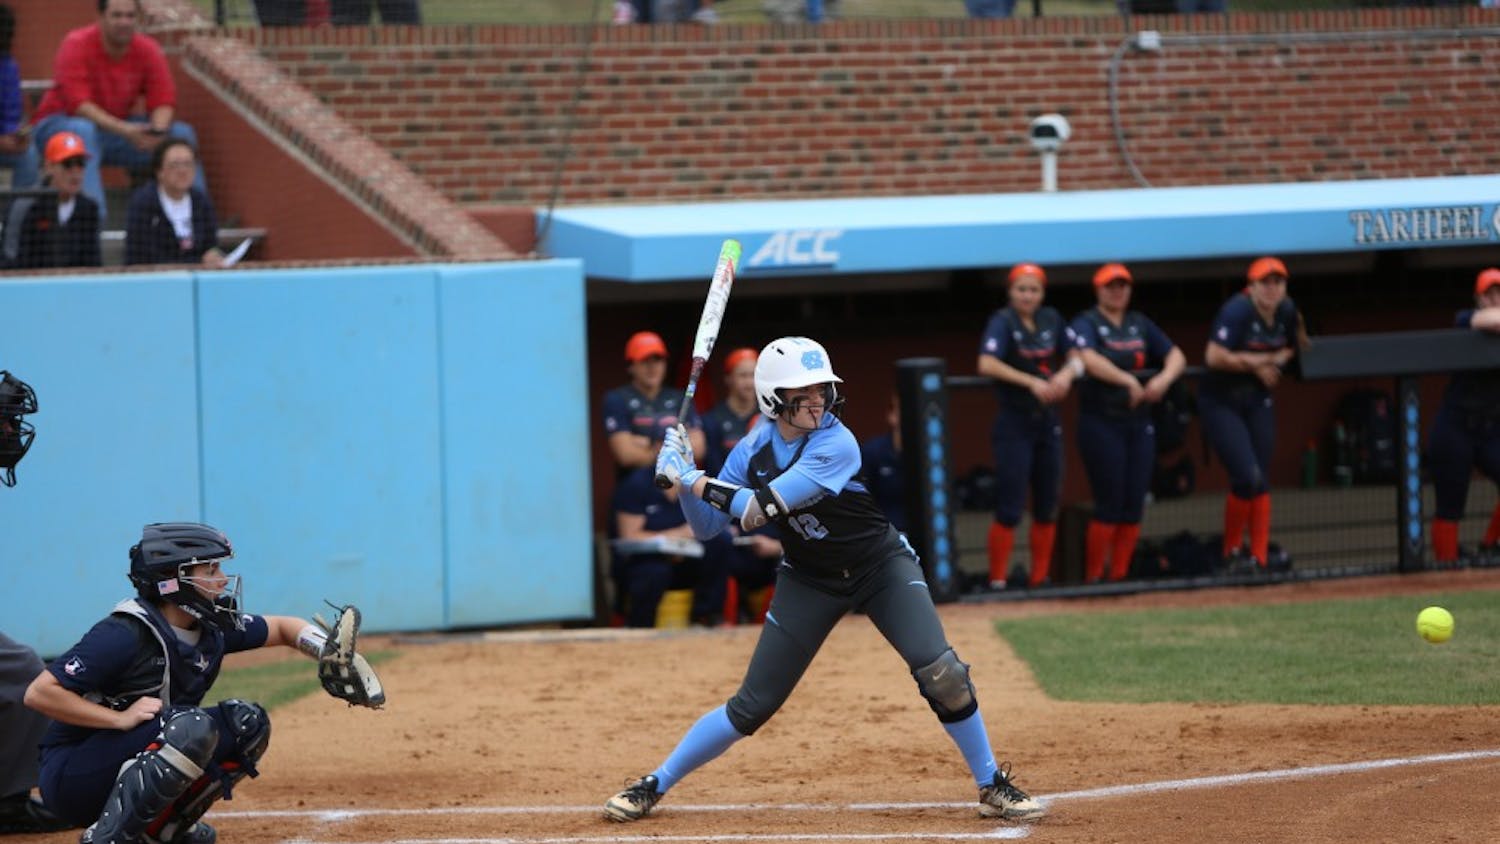 The UNC softball team took on Illinois in their opening seeking Sunday afternoon for the Big Ten/ACC Challenge.